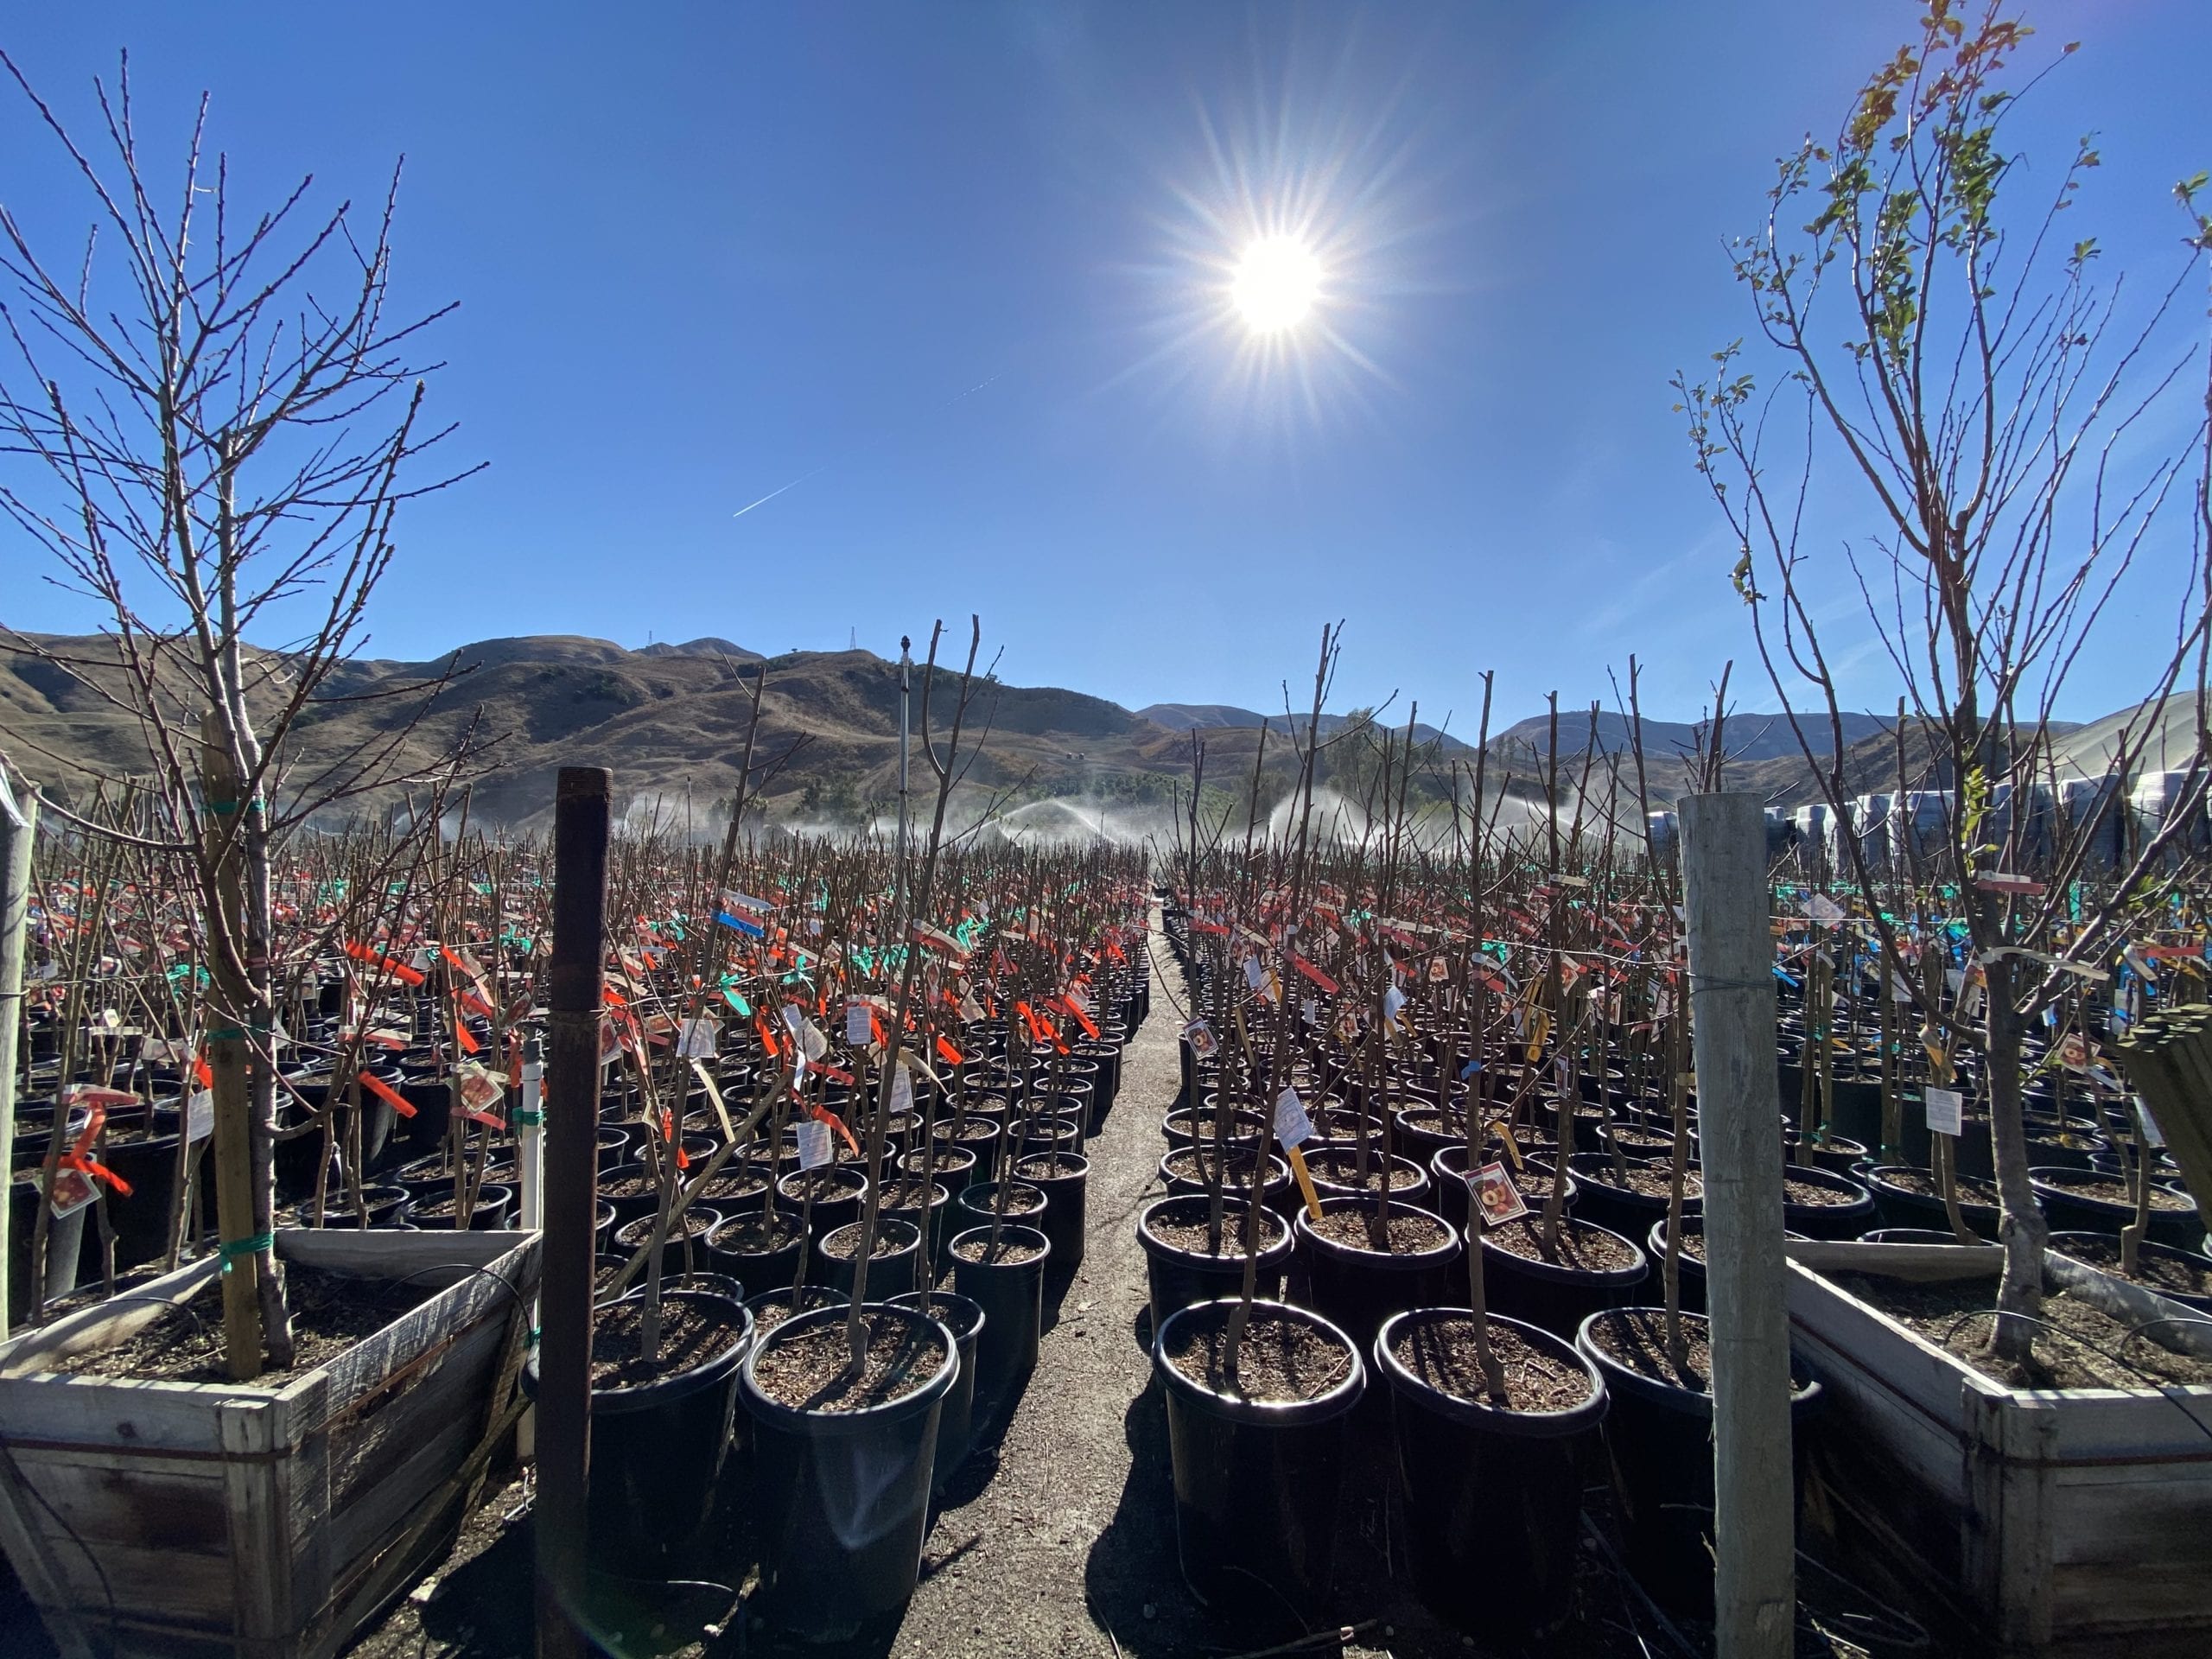 Young fruit trees are pictured lined up in rows, water archs over the plants in the background